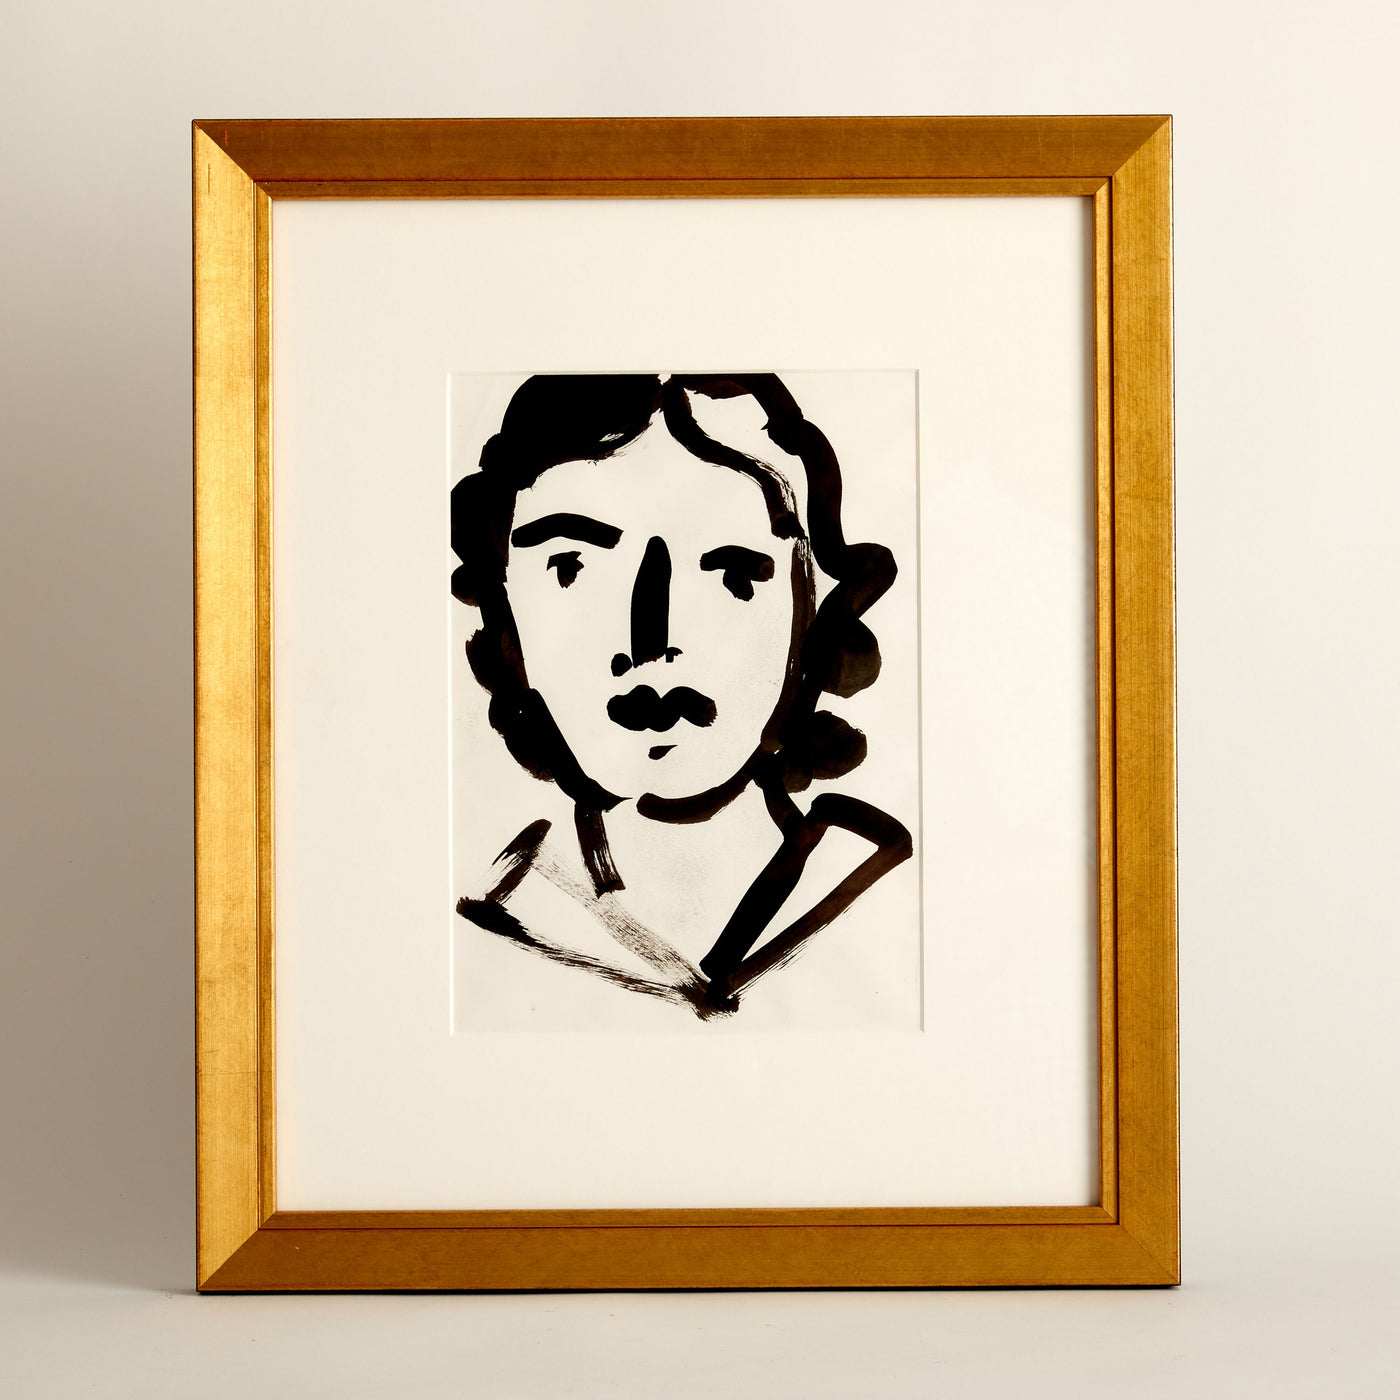 Large Portrait with Gold Frame by Luke Hannam